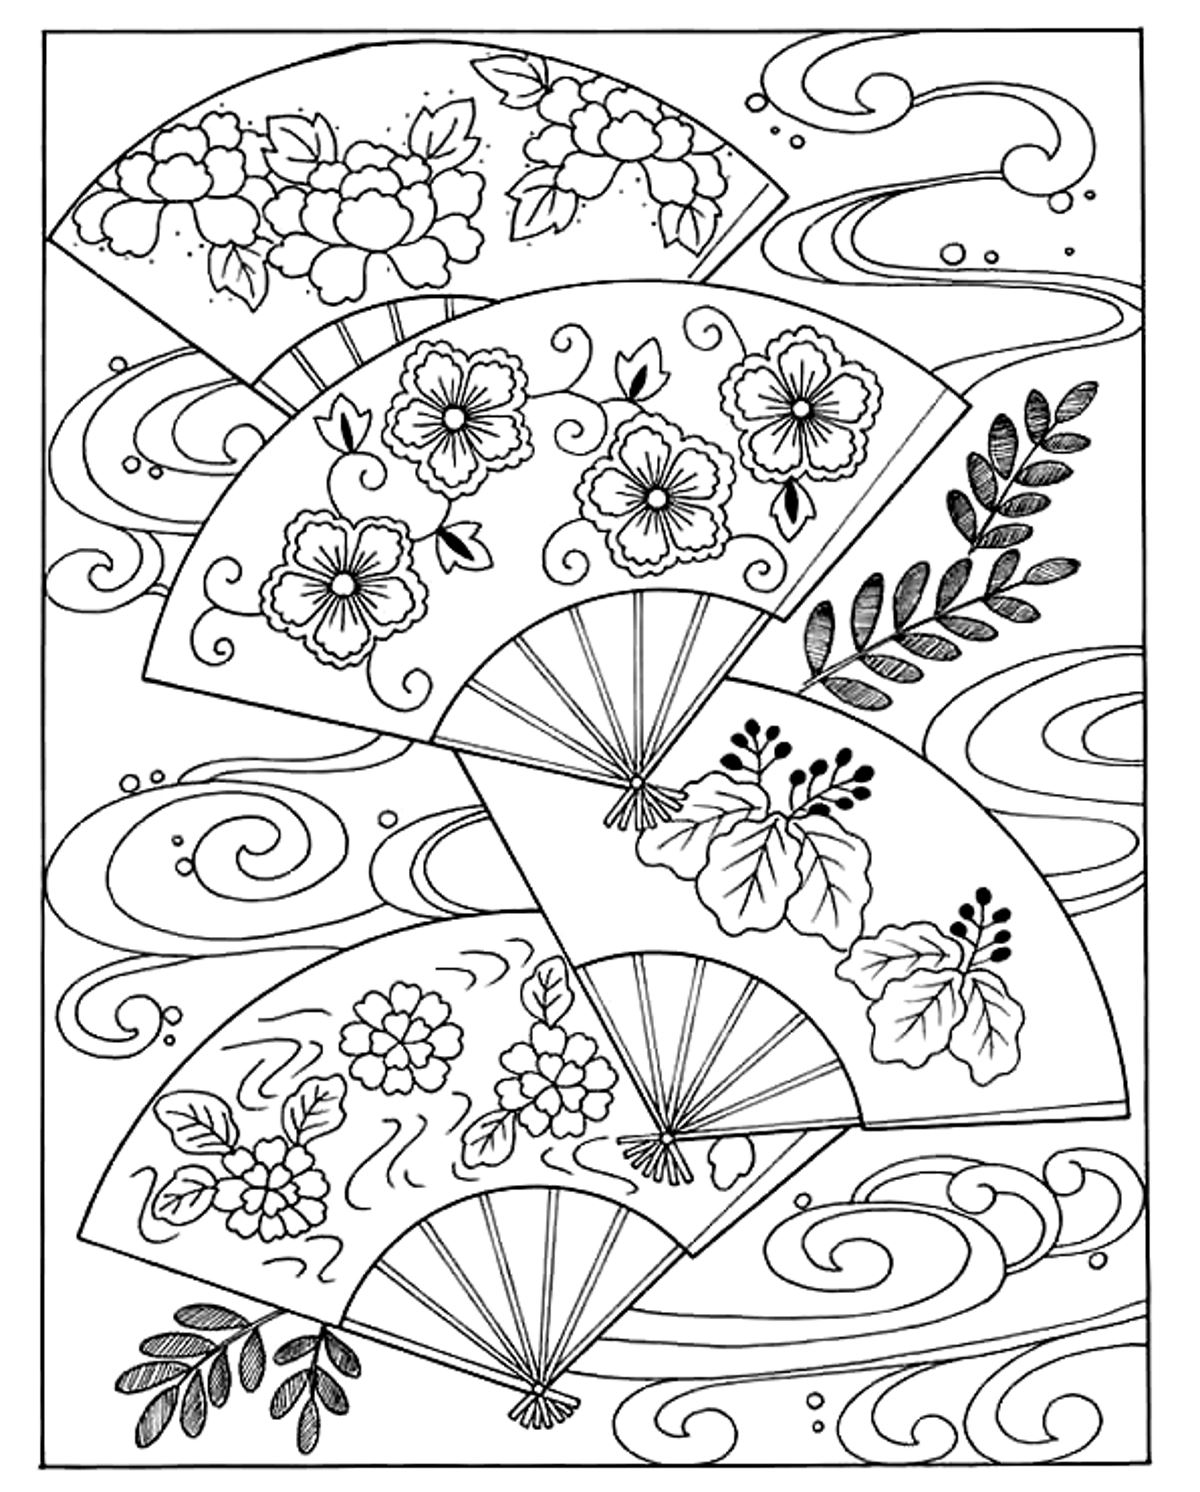 Download Japanese hand fan - Japan Adult Coloring Pages